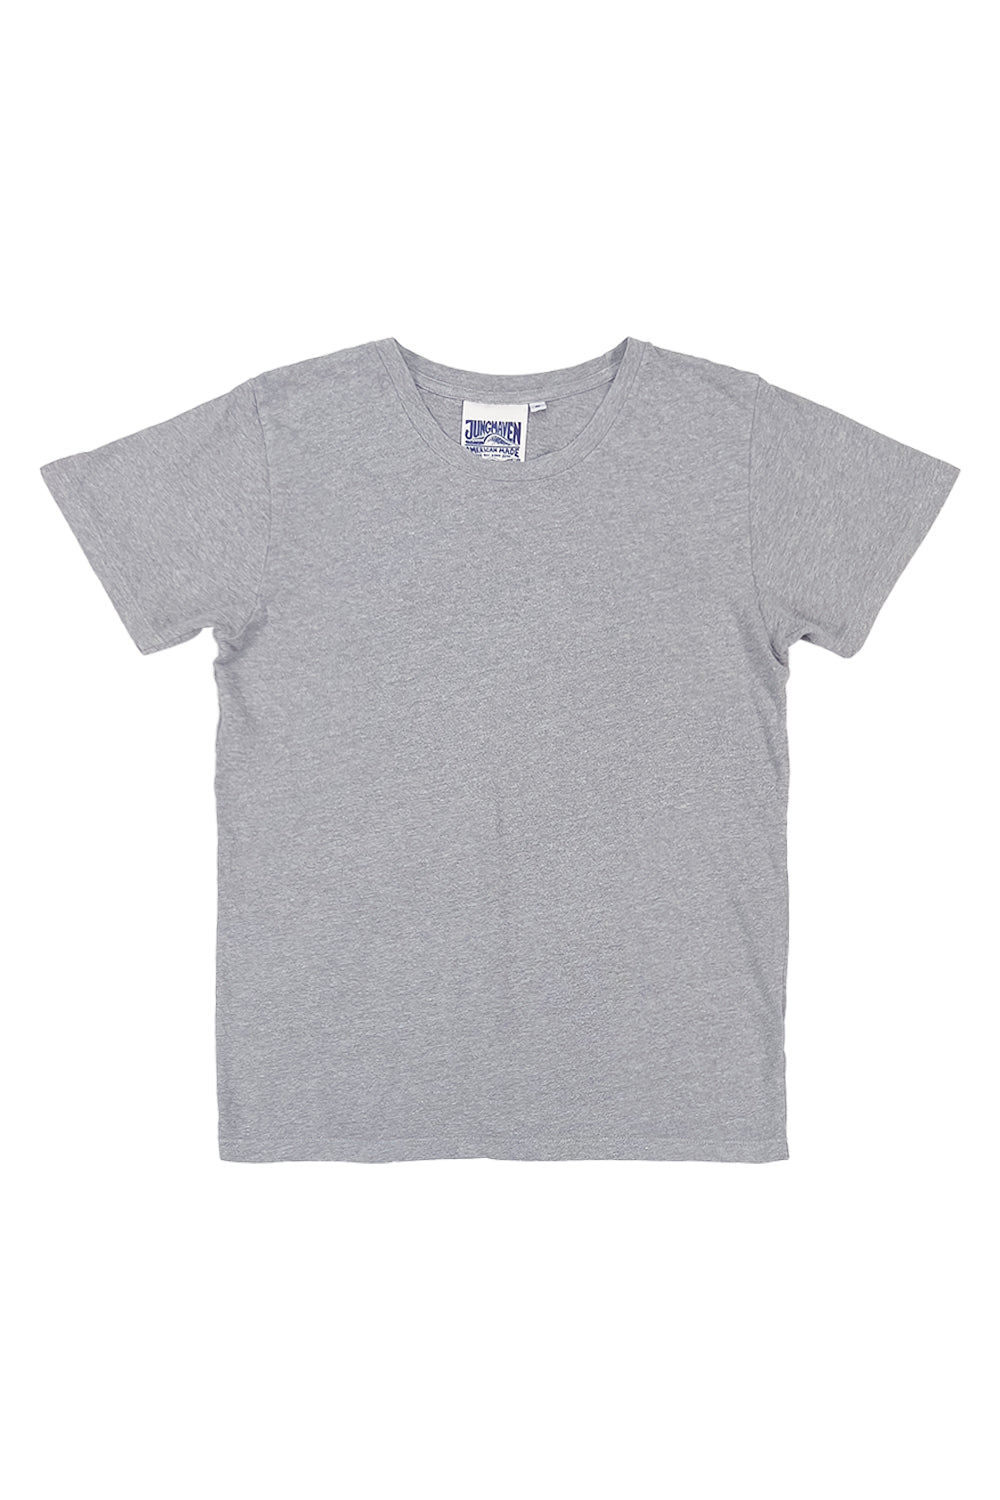 Heathered Lorel Tee | Jungmaven Hemp Clothing & Accessories / Color: Athletic Gray